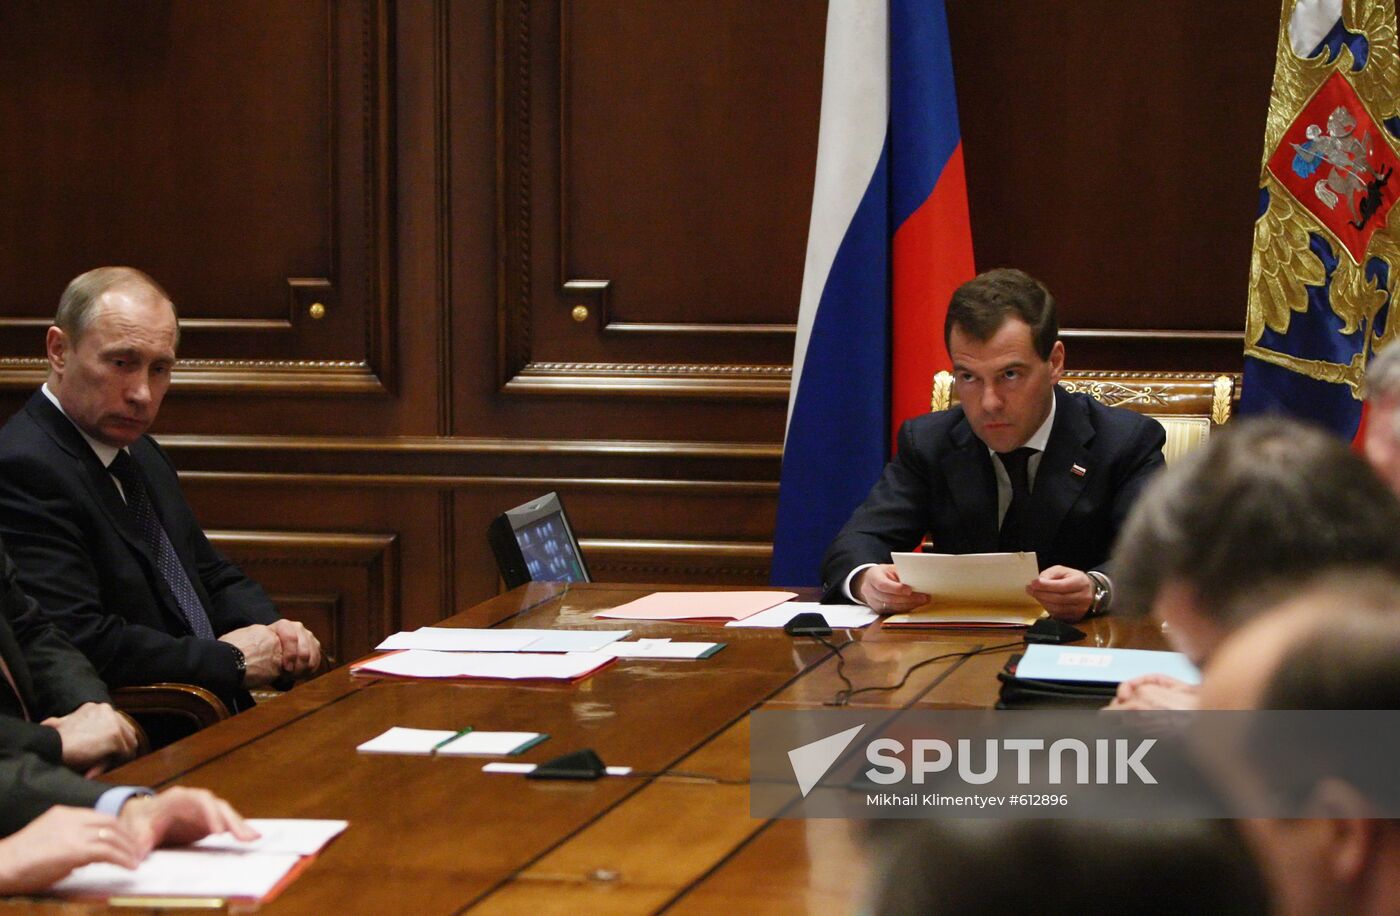 Dmitry Medvedev chairs Russia's Security Council meeting